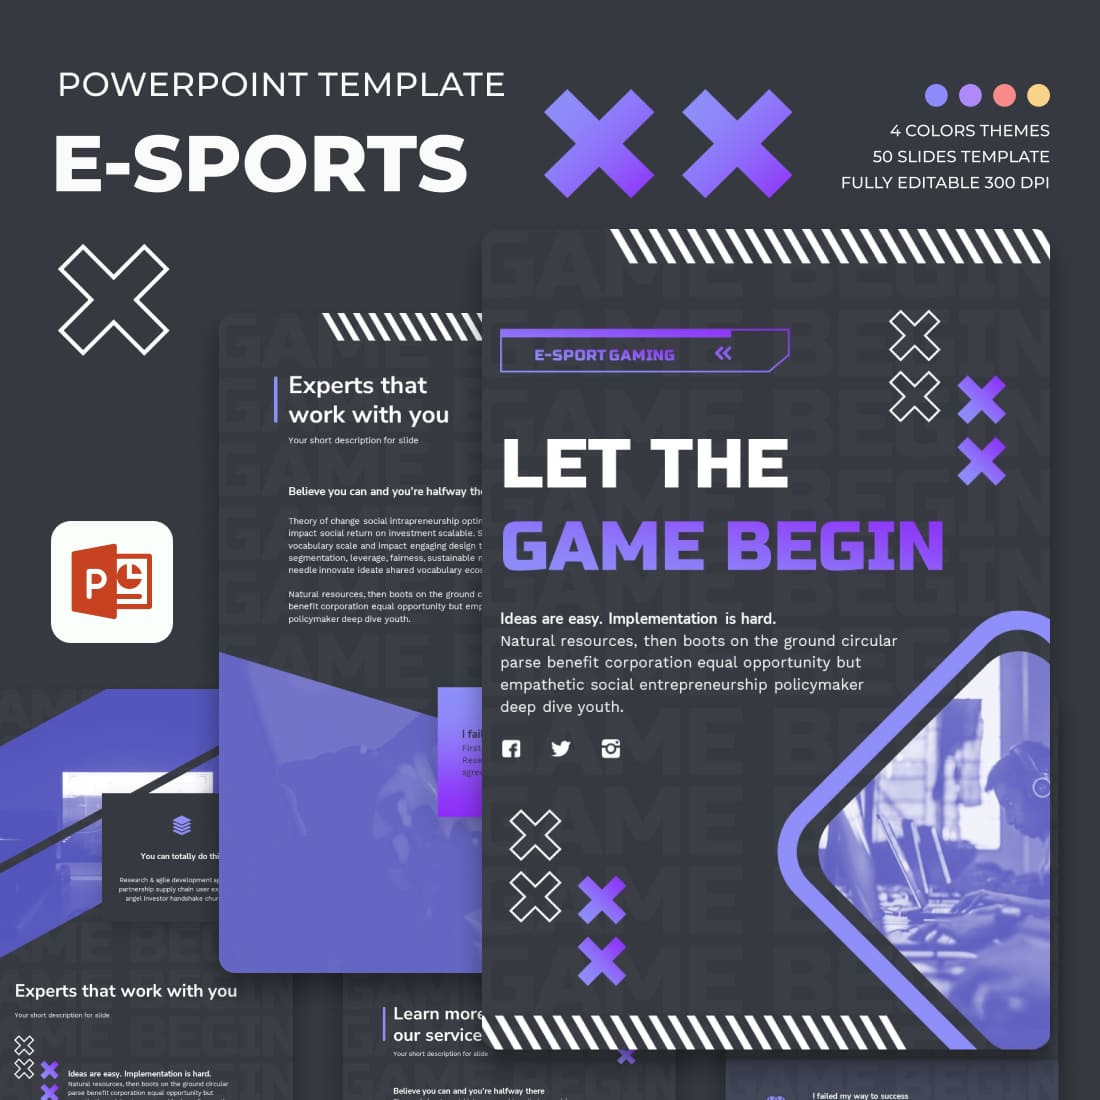 eSports PowerPoint Template - main image preview.